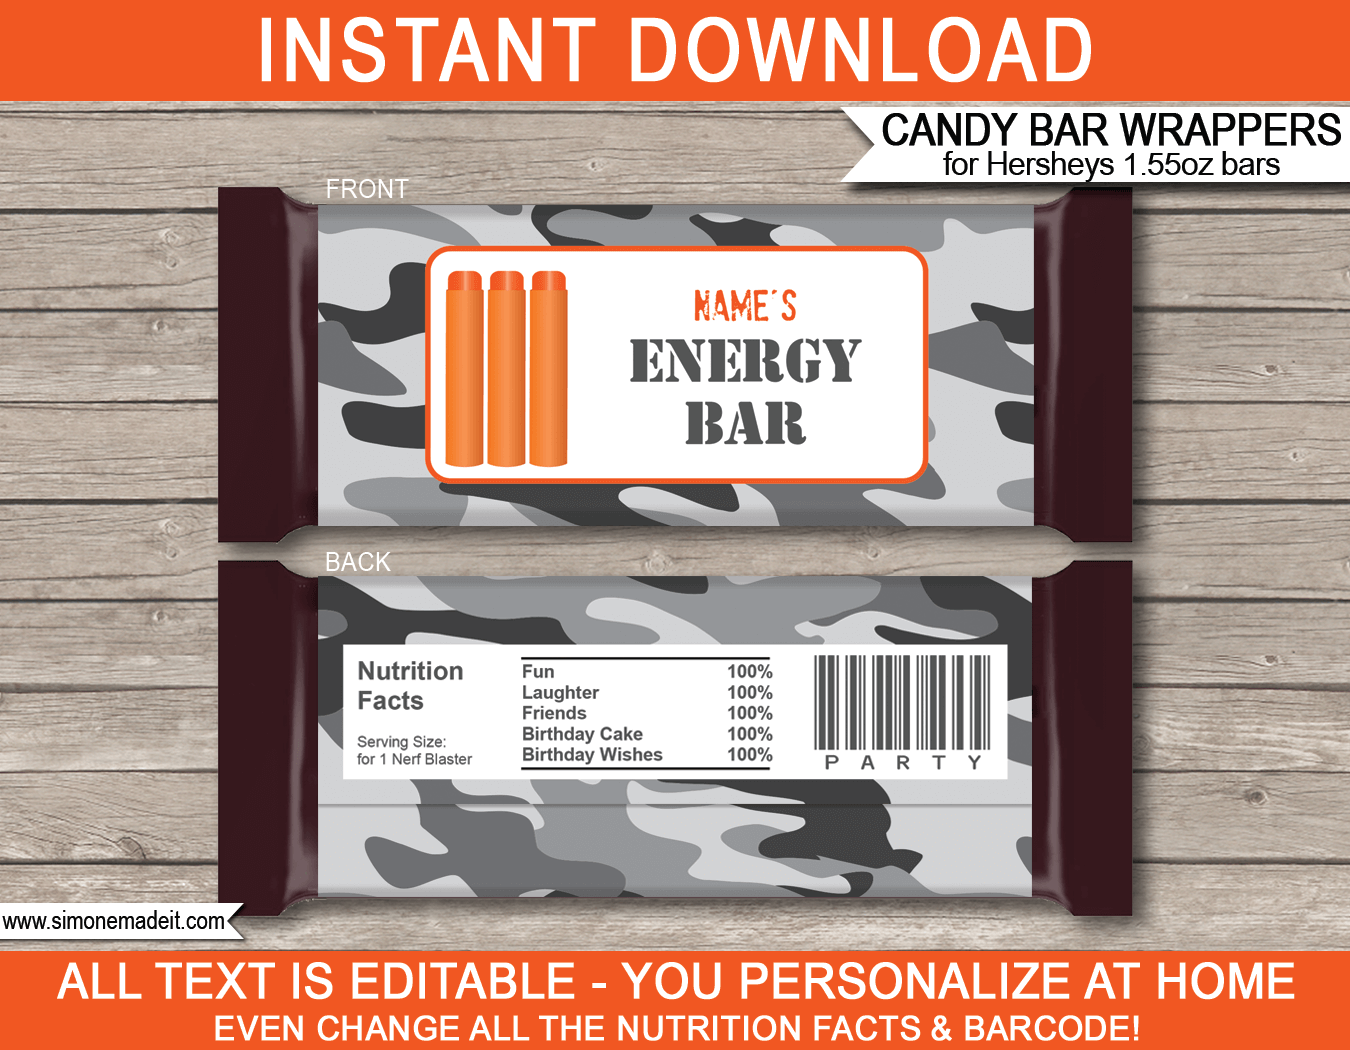 Nerf Party Hershey Candy Bar Wrappers | Gray Grey Camo | Birthday Party Favors | Personalized Candy Bars | Editable Template | INSTANT DOWNLOAD $3.00 via simonemadeit.com